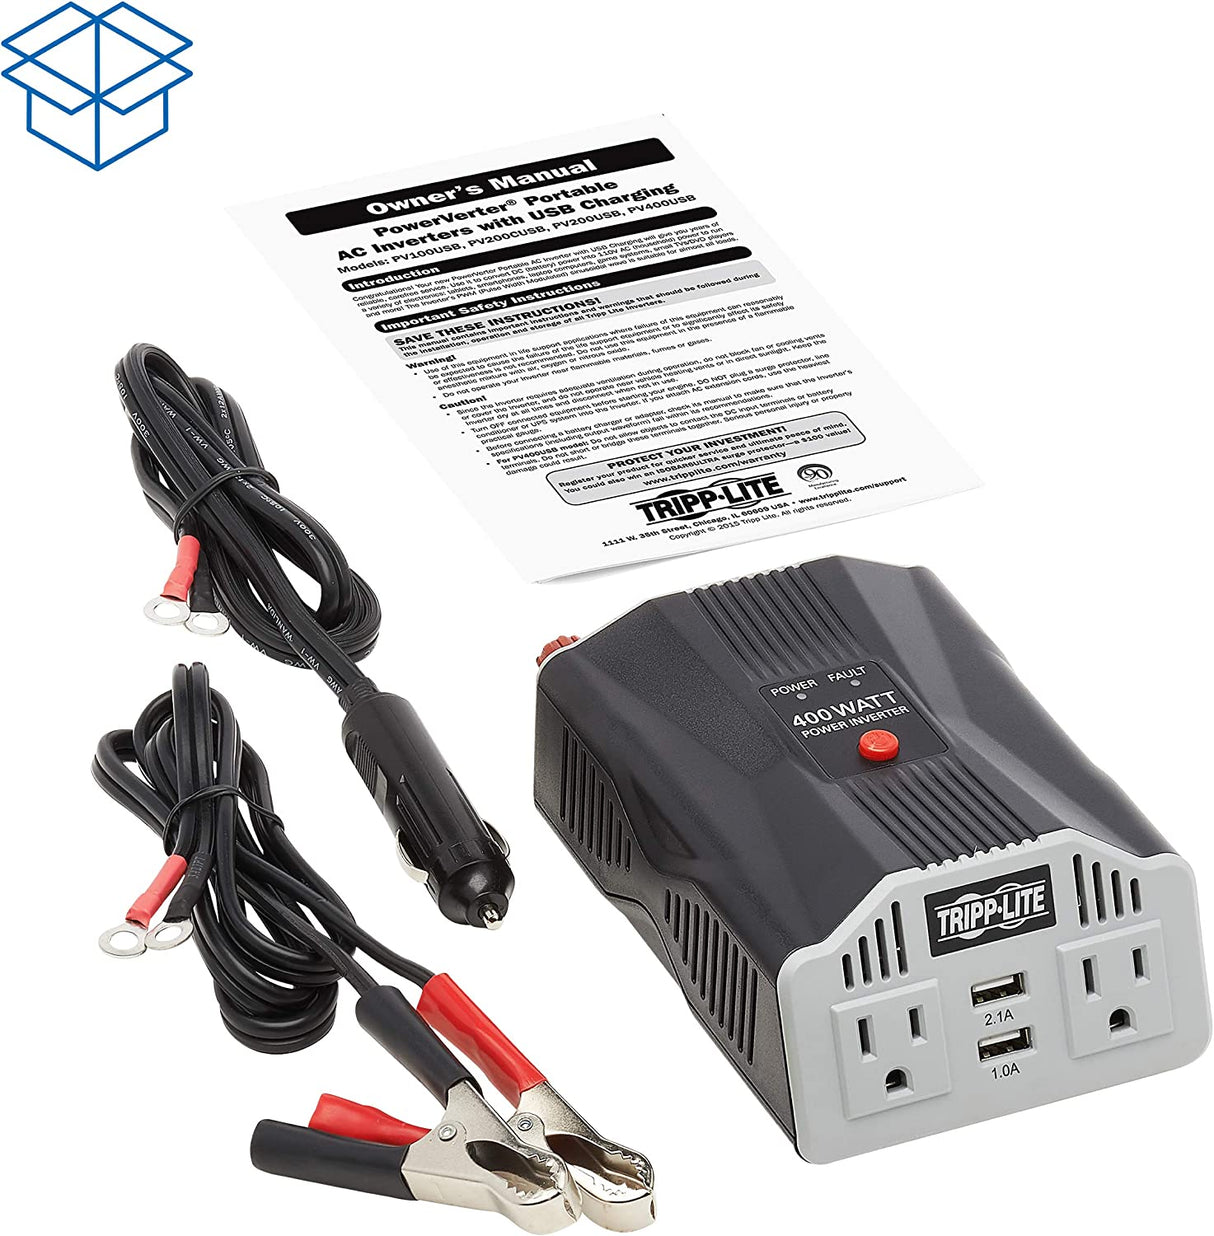 Tripp Lite 400W Car Power Inverter with 2 Outlets &amp; 2 USB Charging Ports, Auto Inverter, Ultra Compact (PV400USB),Gray